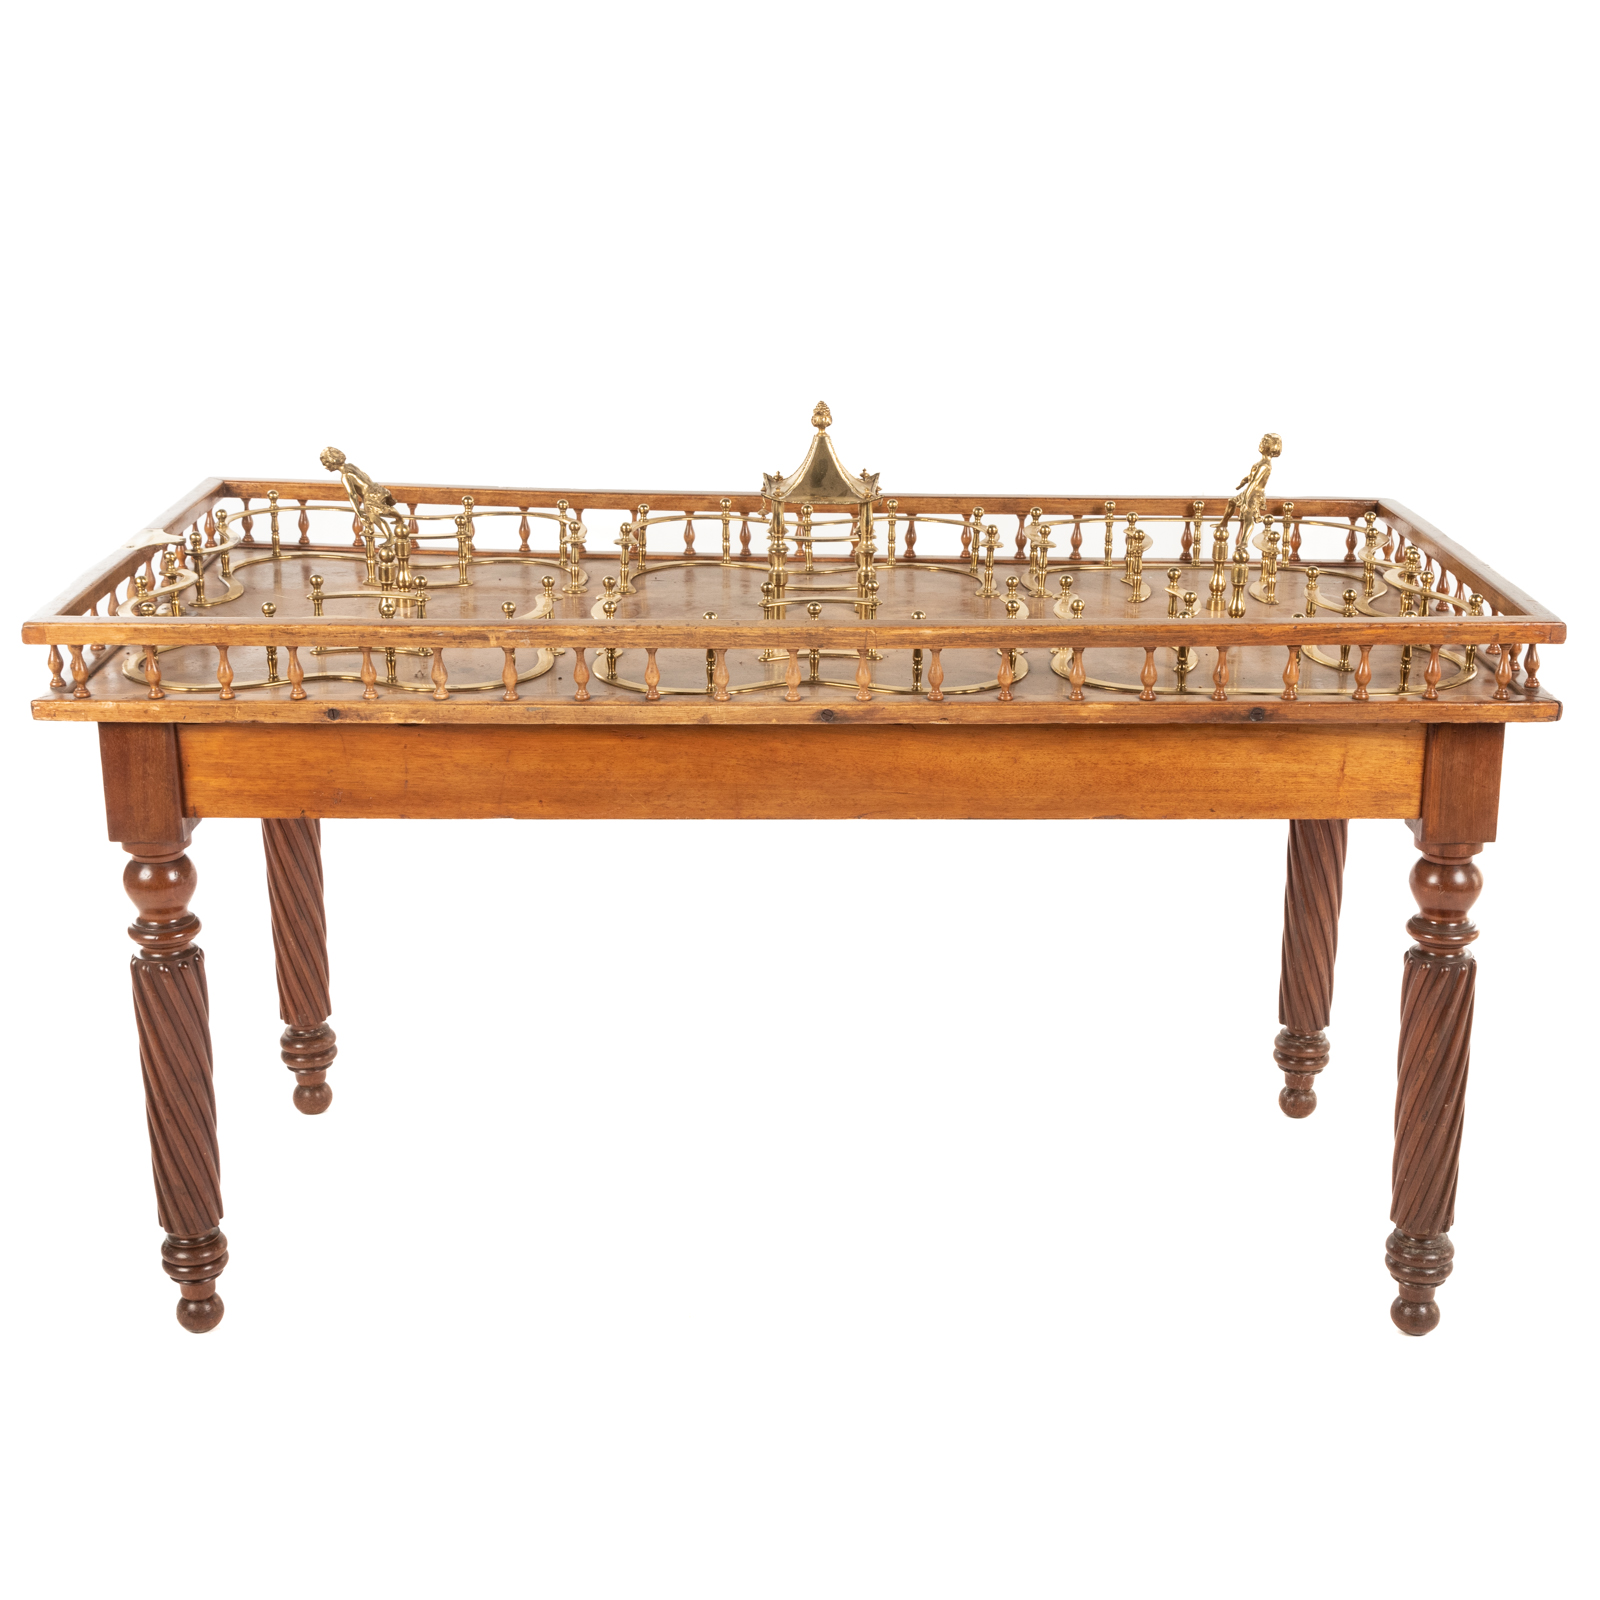 FRENCH BAGATELLE GAME TABLE Late 2e907d